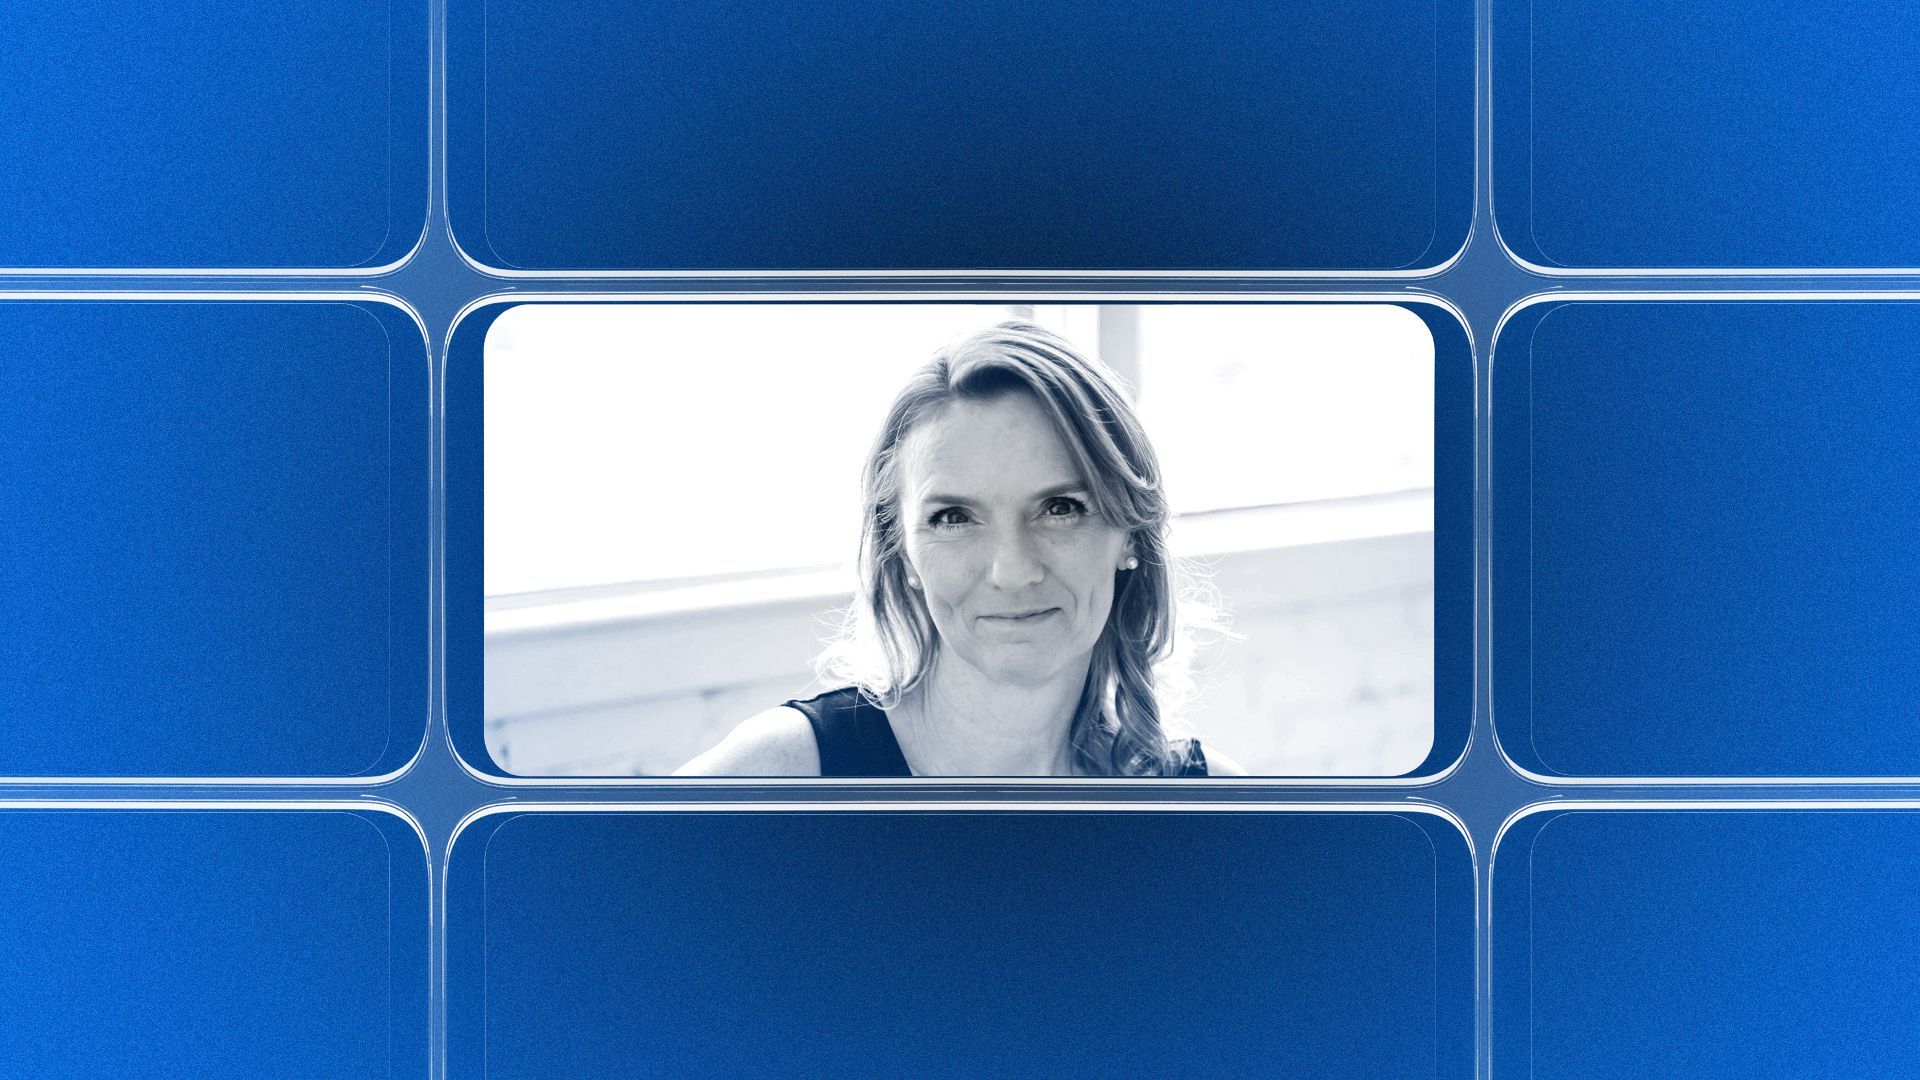 Photo illustration of a grid of smartphone screens, the center one showing an image of Laura Beil.